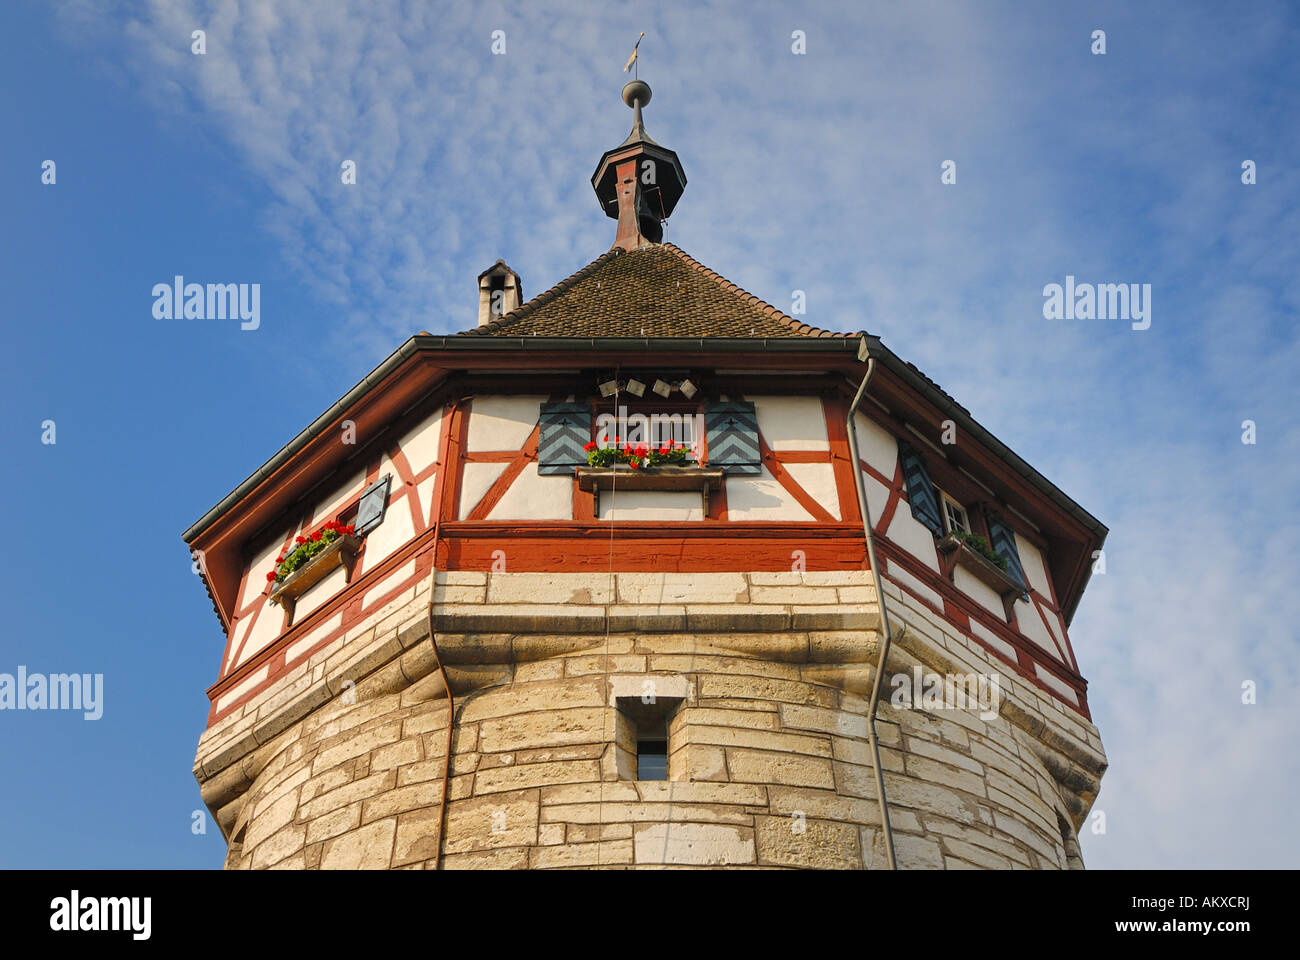 Fachwerkbau High Resolution Stock Photography and Images - Alamy